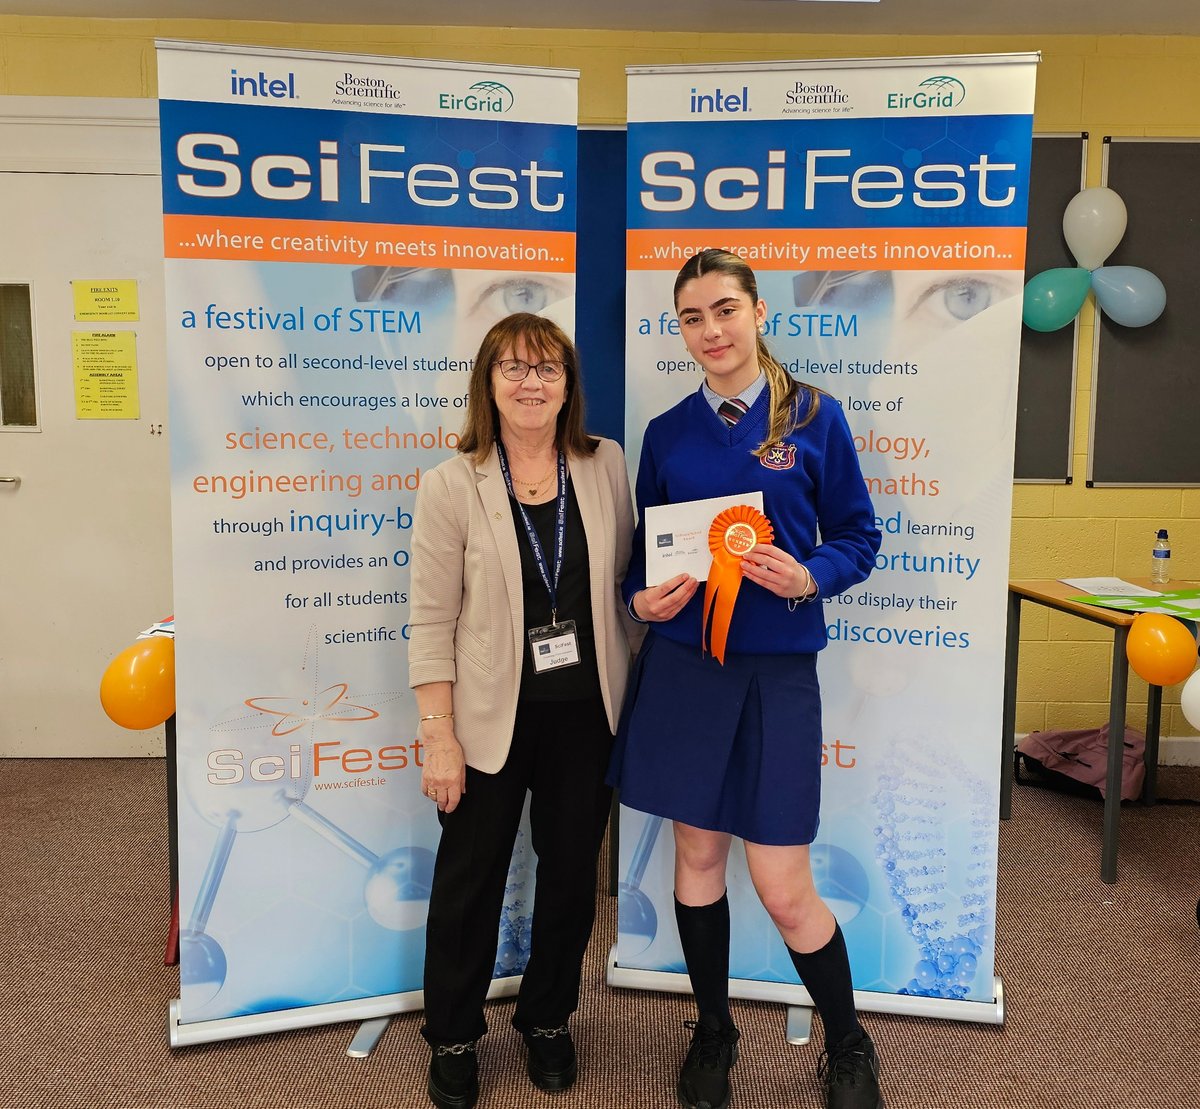 Congratulations to the award winners, #scifestatschool #AssumptionSS, Walkinstown and to all the students who participated. Well done also to the organising teacher Michelle Salter. @Education_Ire @womenintech @WITSIreland @IOPTeaching